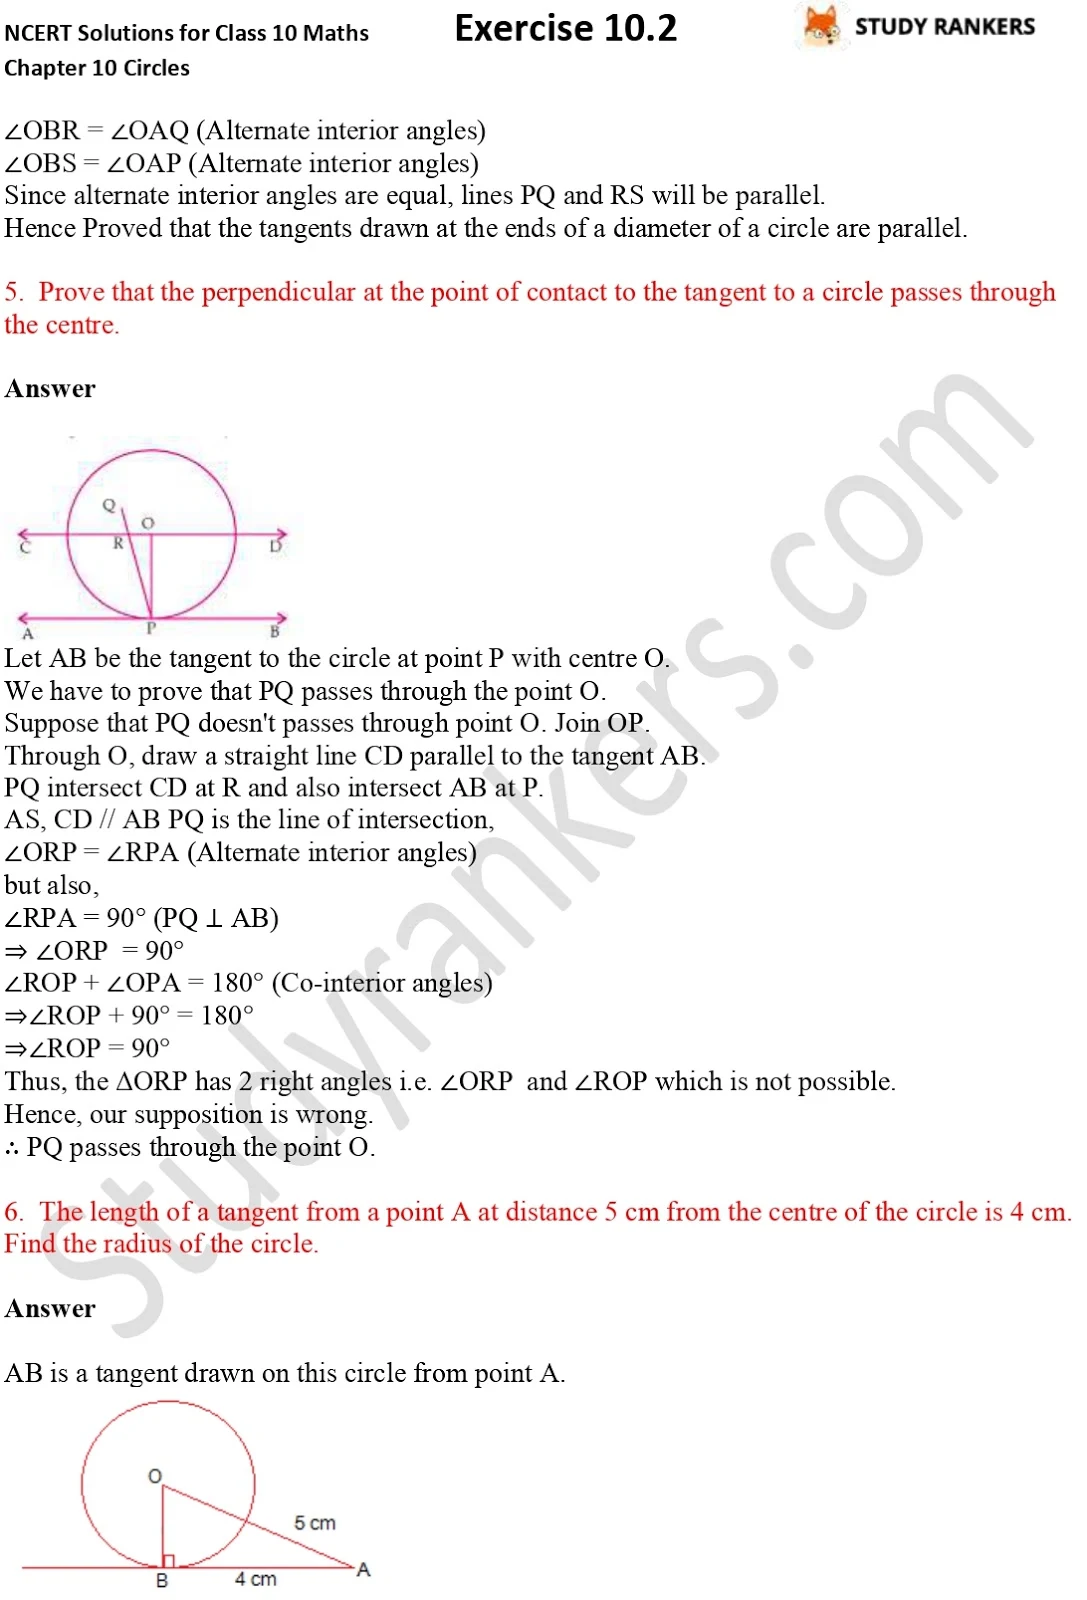 NCERT Solutions for Class 10 Maths Chapter 10 Circles Exercise 10.2 Part 4